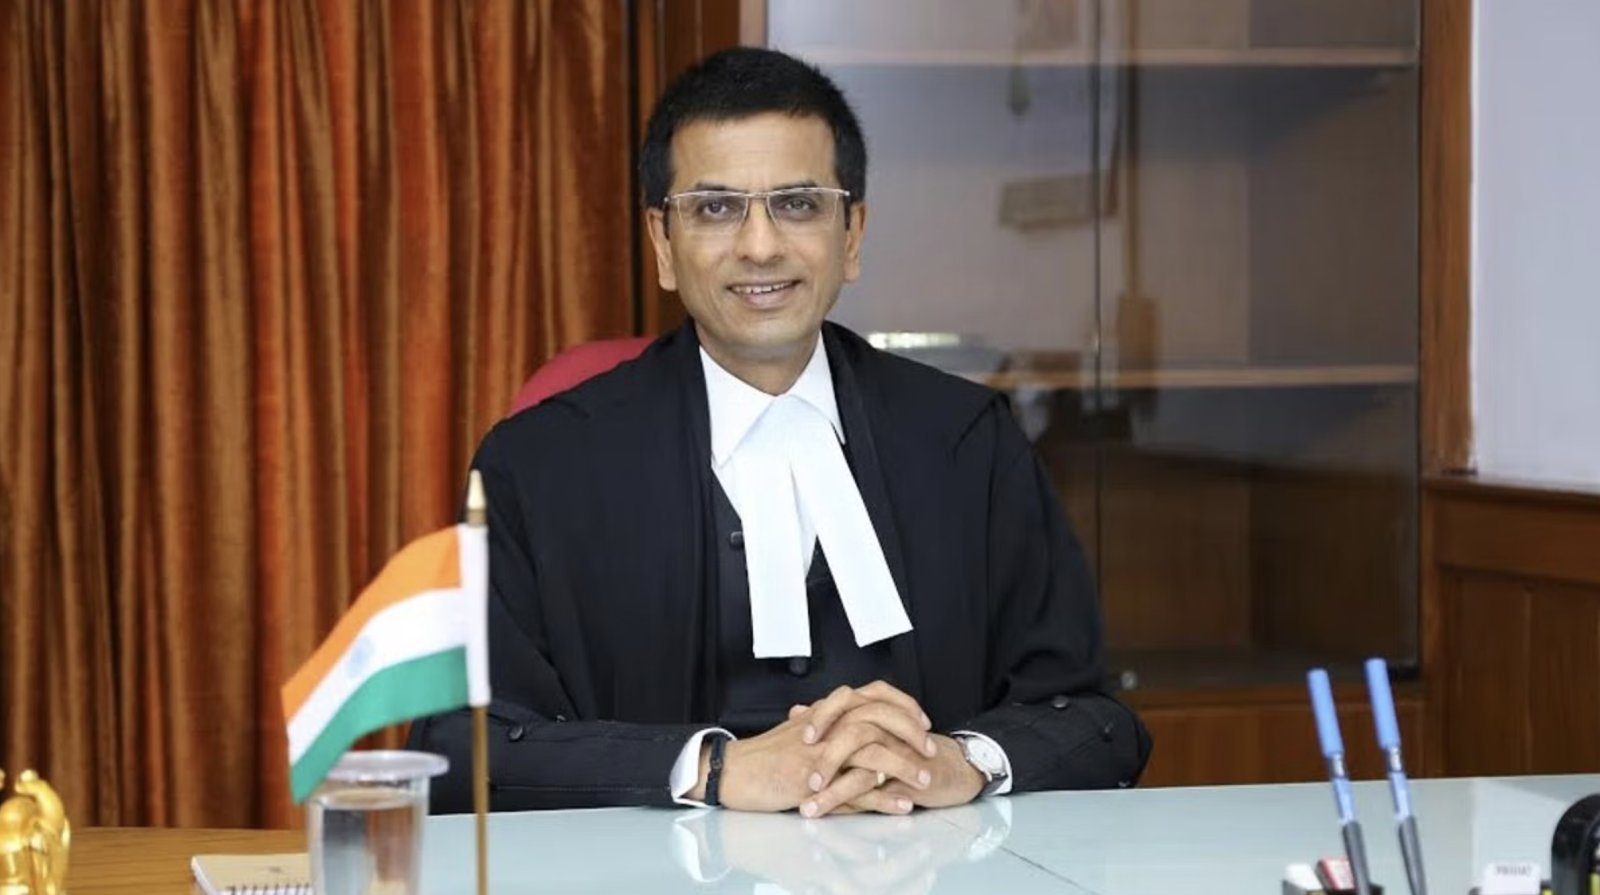 CJI Chandrachud's big statement on caste system and reservation said this about government interference